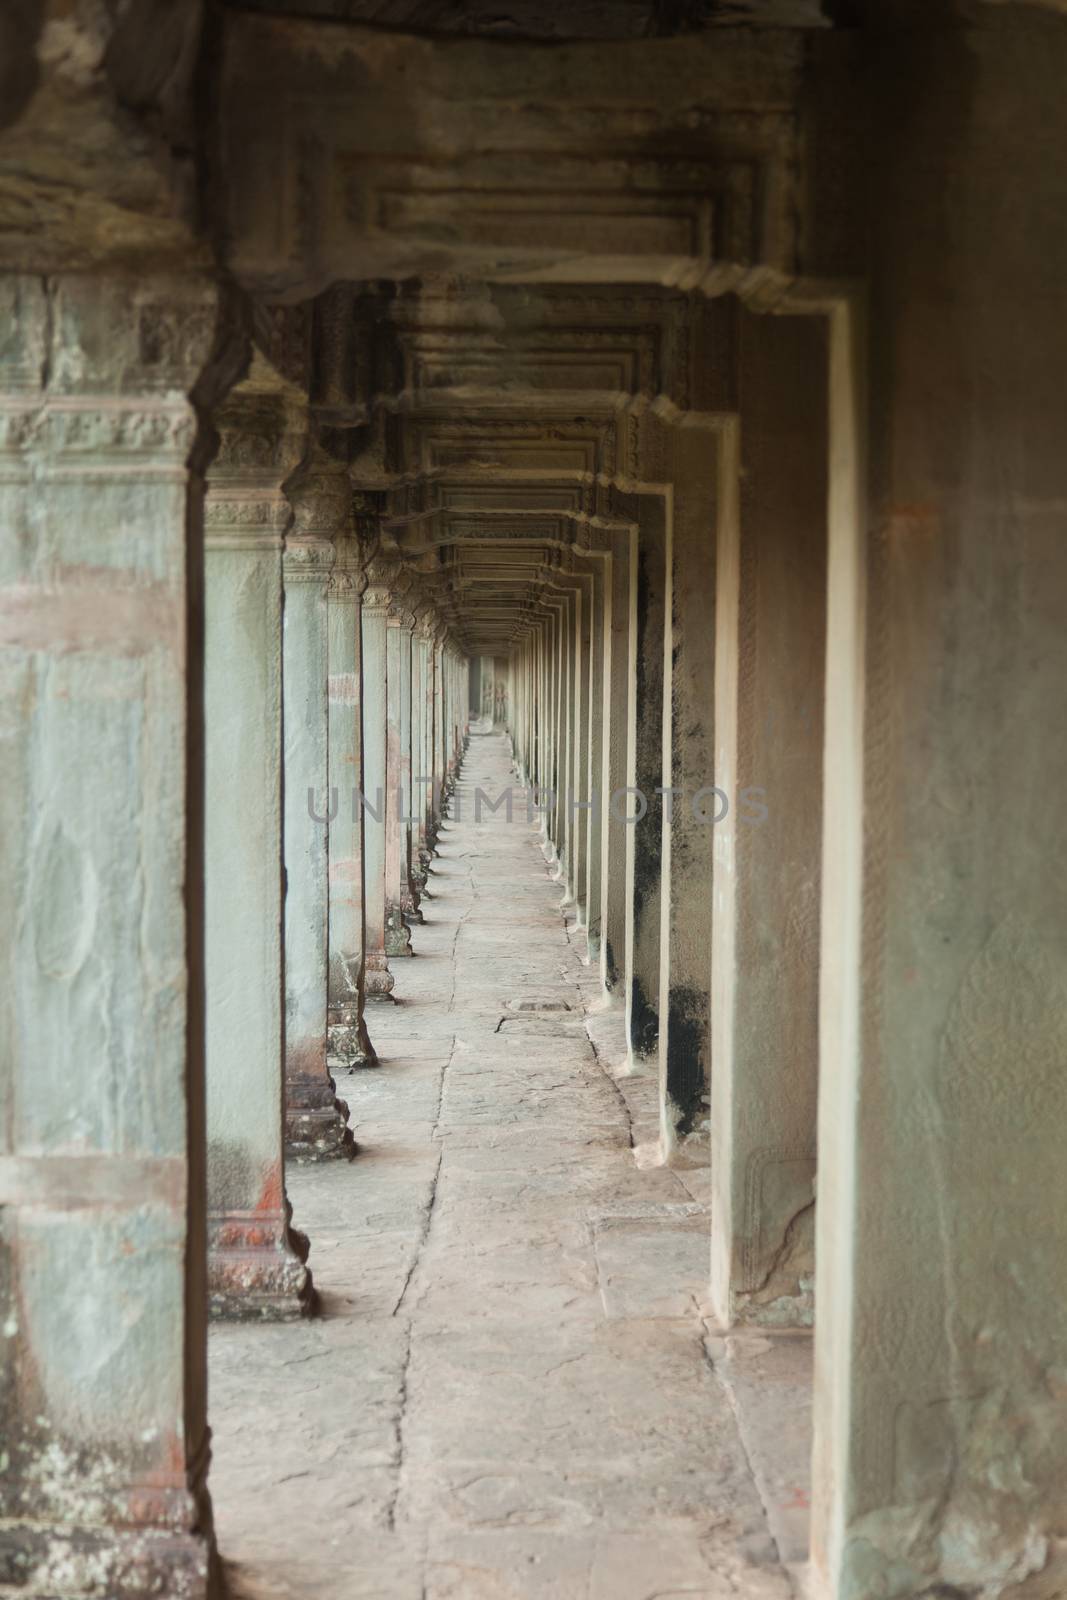 The temple complex of Angkor Watt, Cambodia, passageway with repeating arches by kgboxford